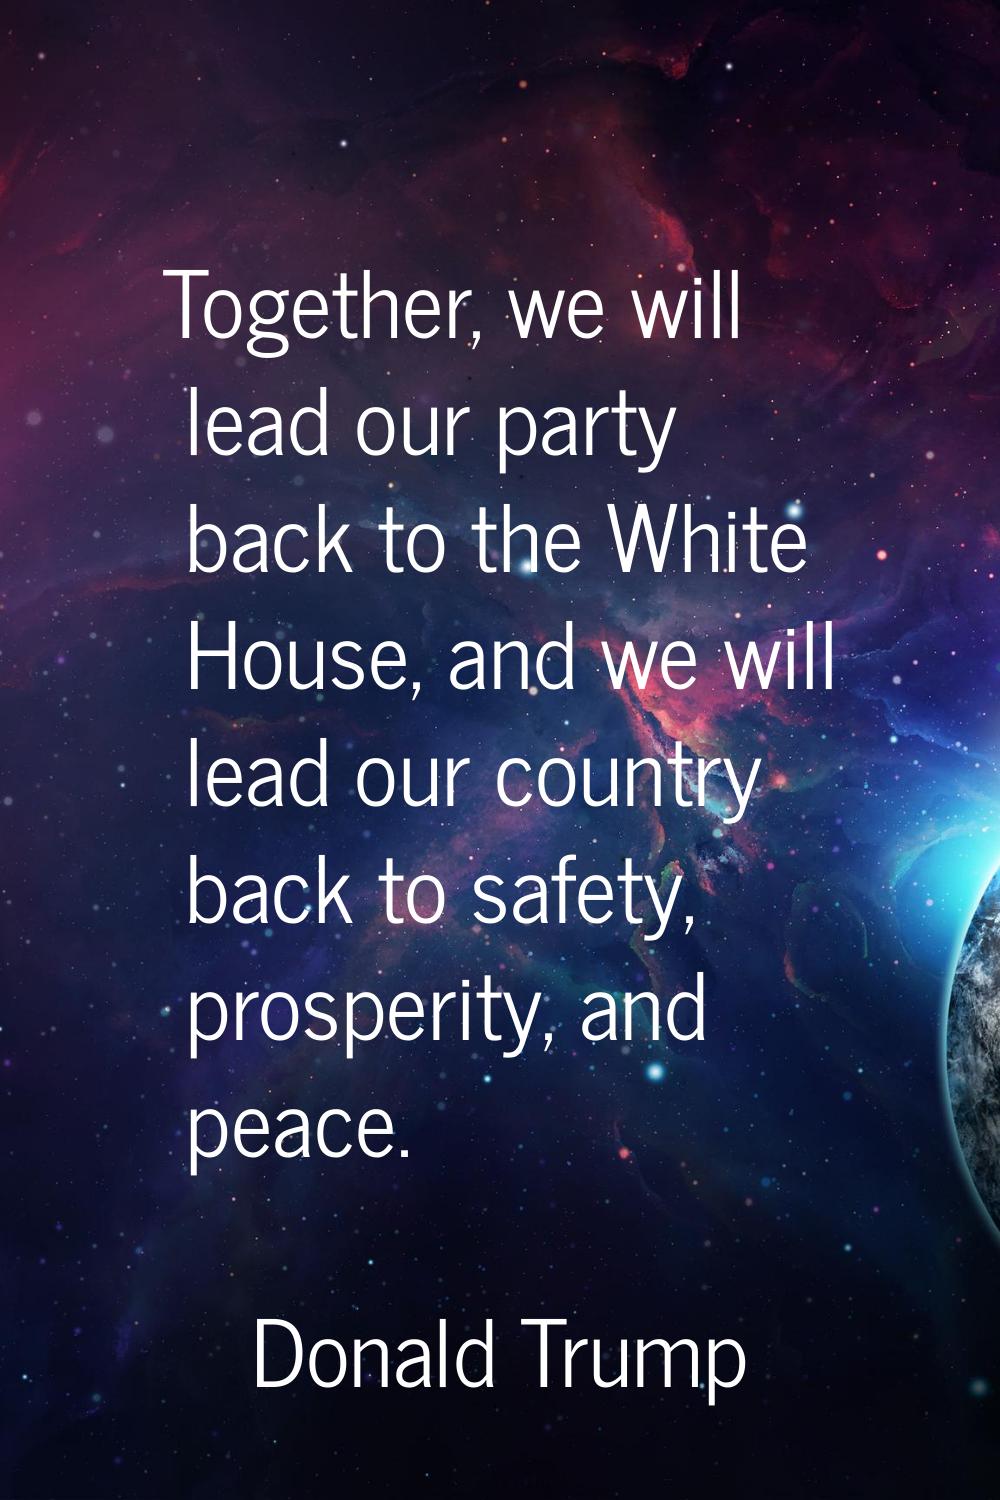 Together, we will lead our party back to the White House, and we will lead our country back to safe